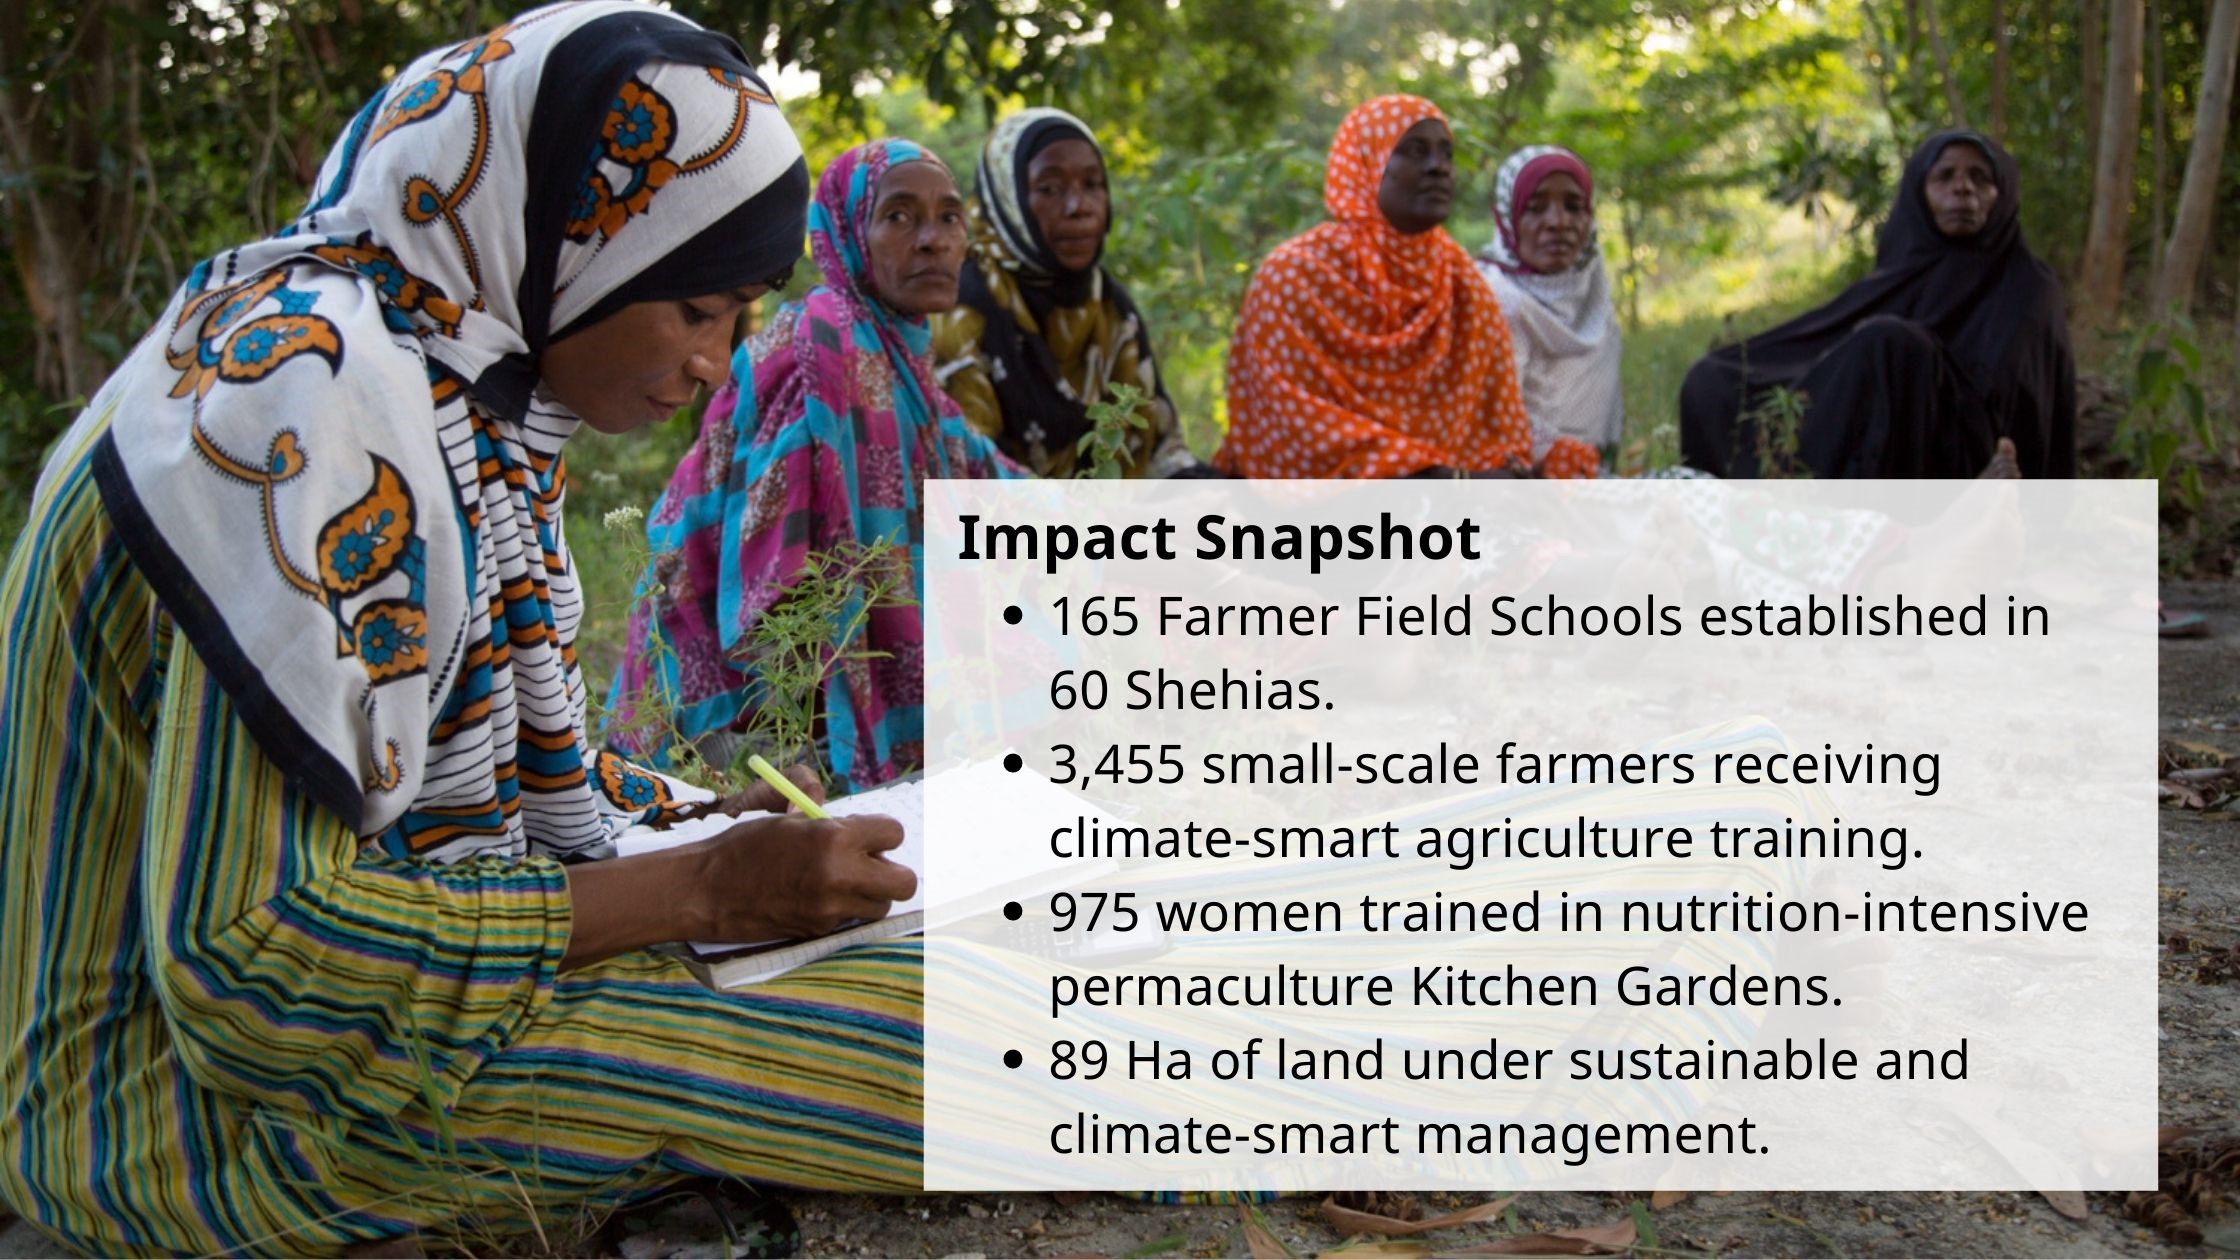 Impact Snapshot 165 Farmer Field Schools established in 60 Shehias. 3,455 small-scale farmers receiving climate-smart agriculture training. 975 women trained in nutrition-intensive permaculture Kitchen Gardens. 89 Ha of land under sustainable and climate-smart management.